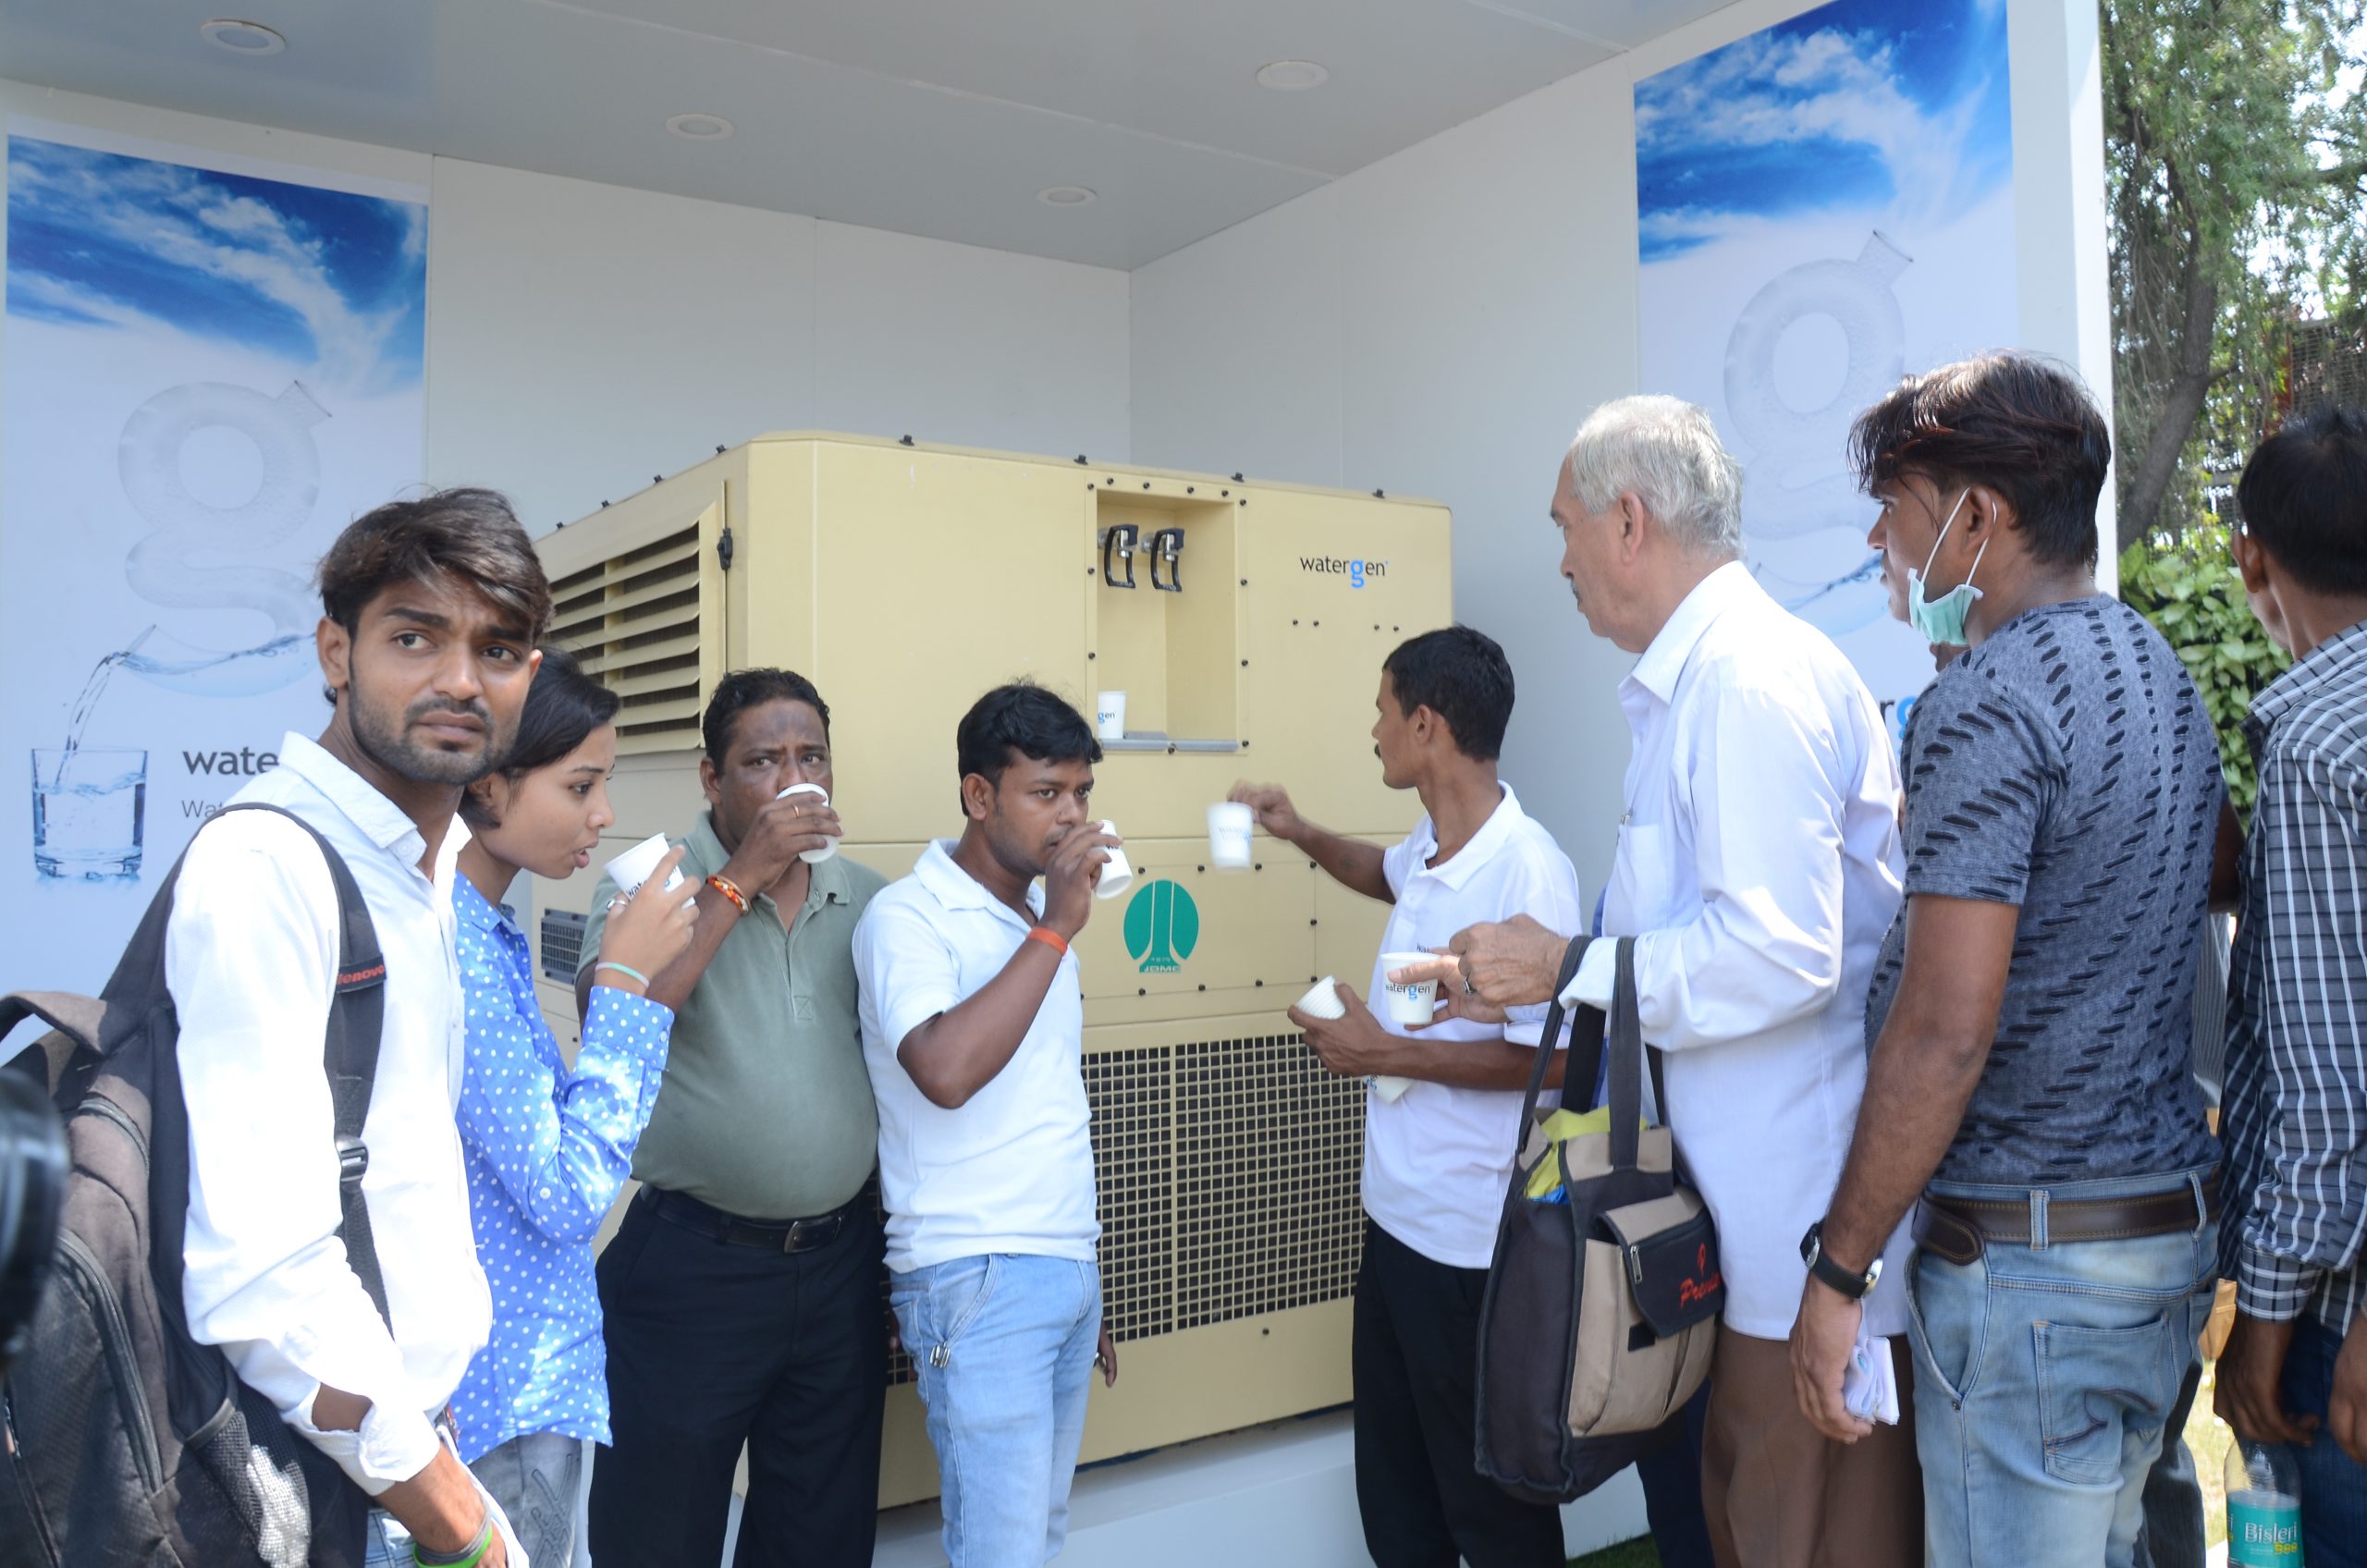 Watergen in collaboration with NDMC installed Air to Water ATM at Connaught Place